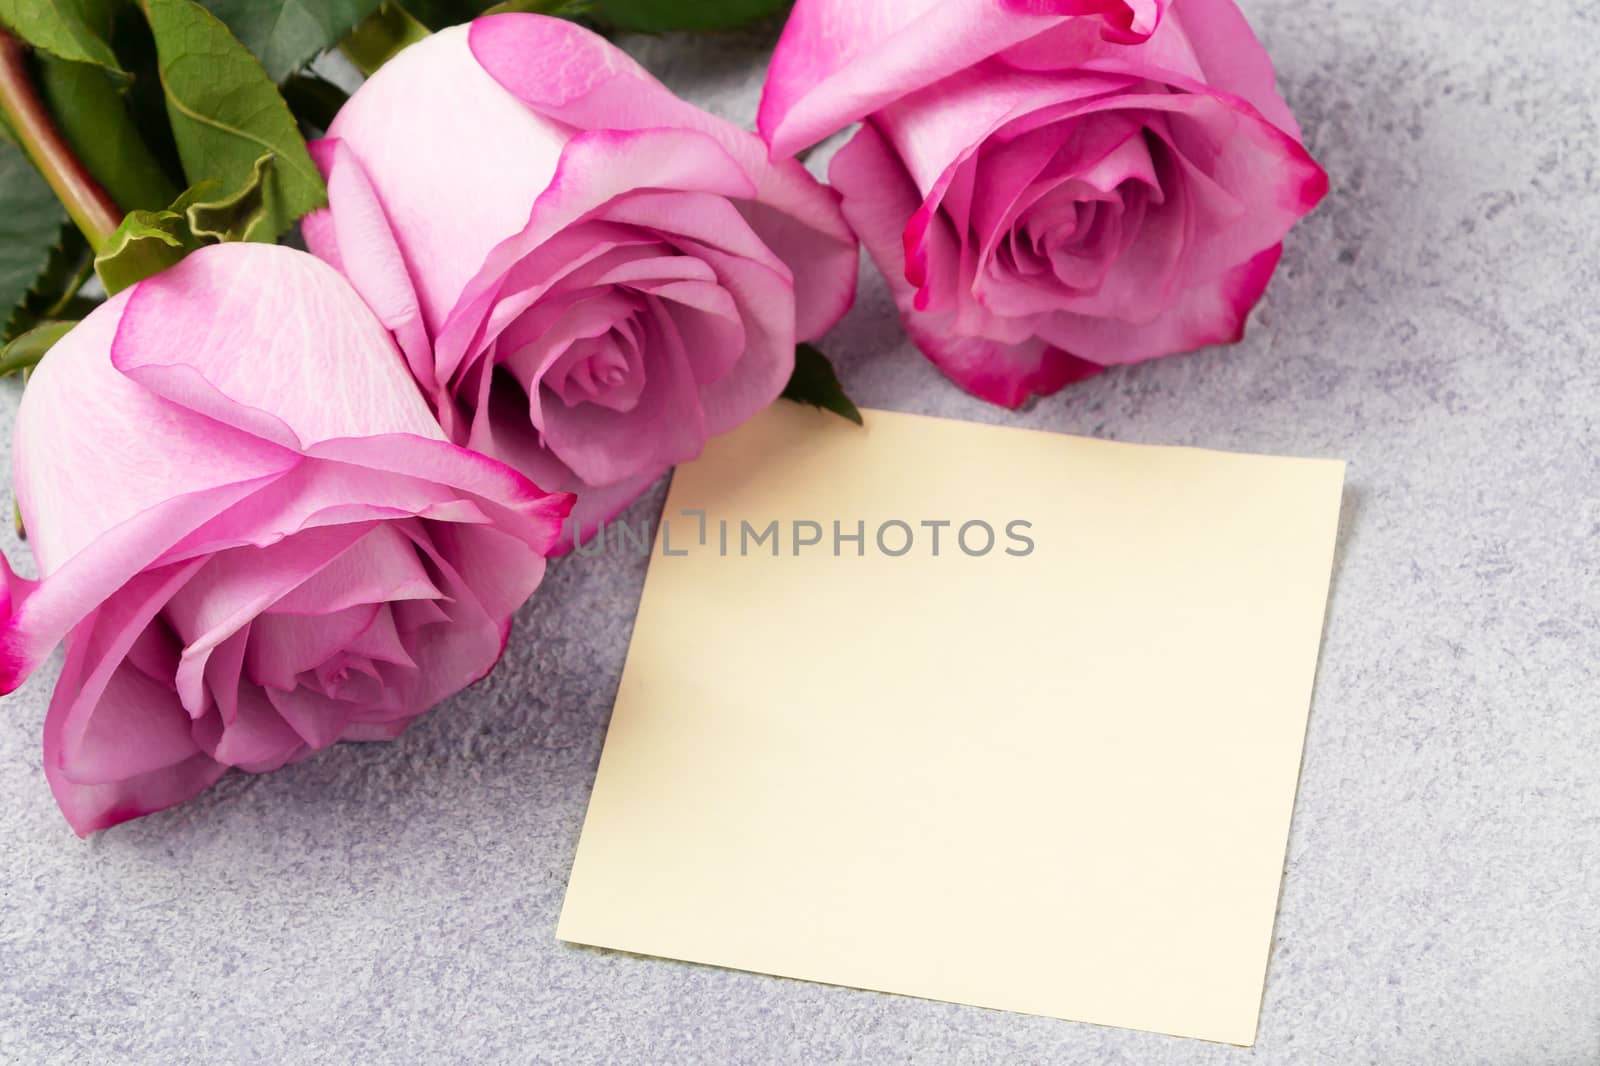 bouquet of pink roses and a blank note on the table by galsand